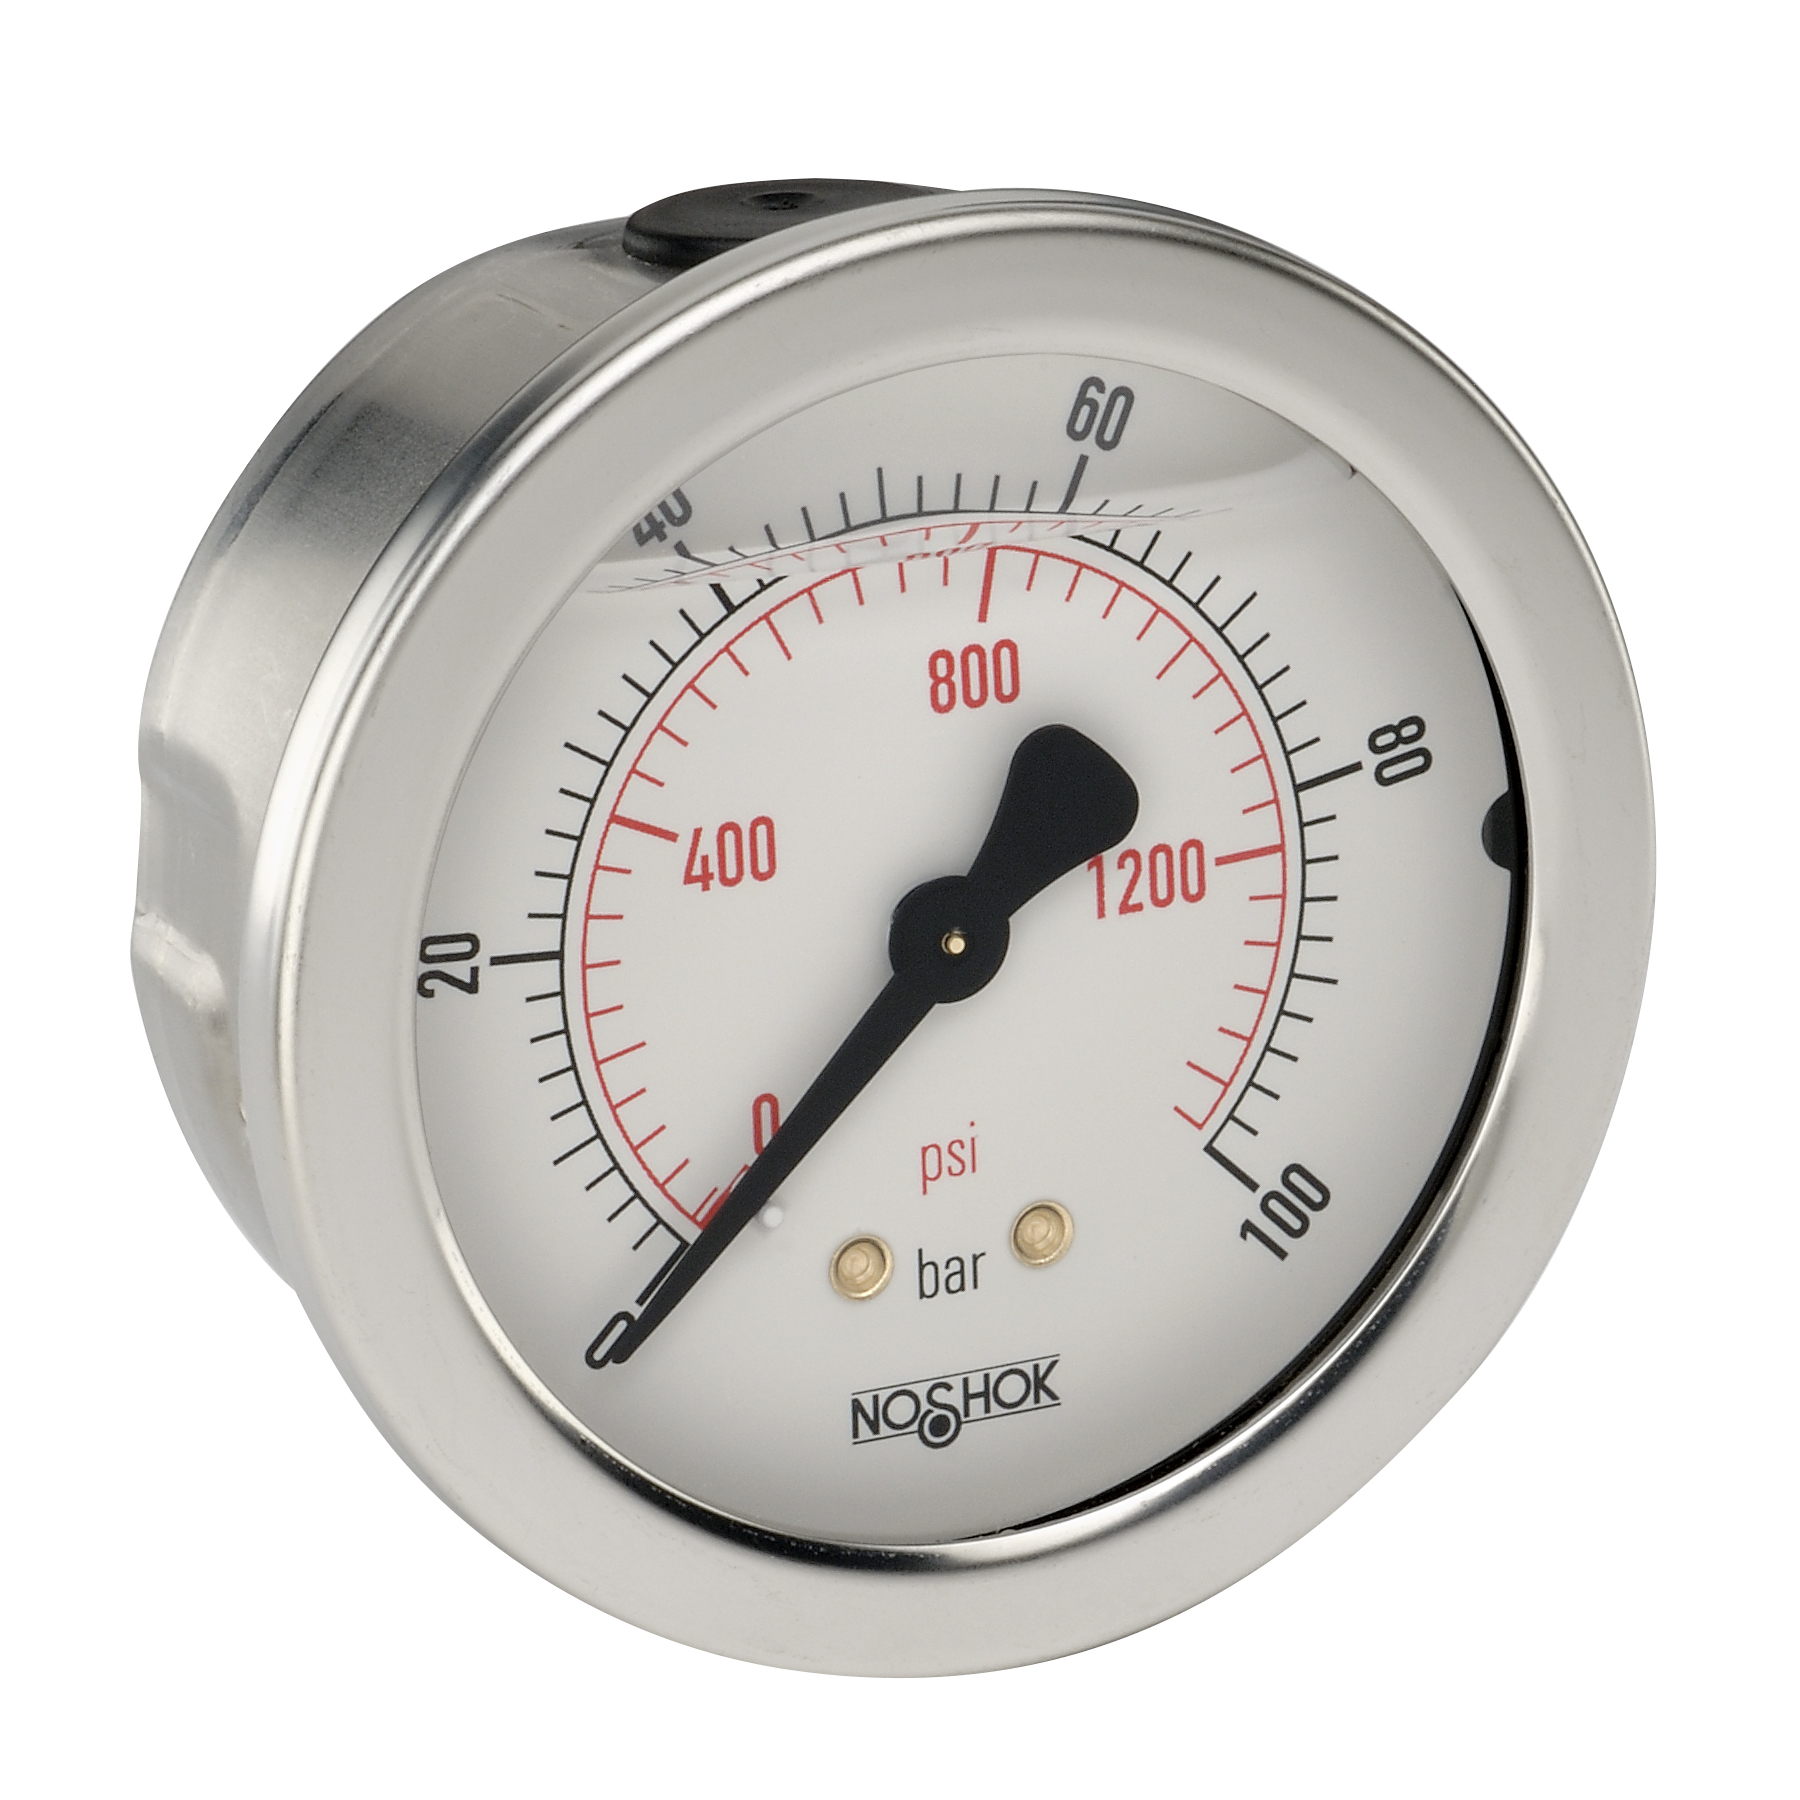 25-911-2.5-bar/psi-G1/4 900 Series ABS and Stainless Steel Liquid Filled Pressure Gauges